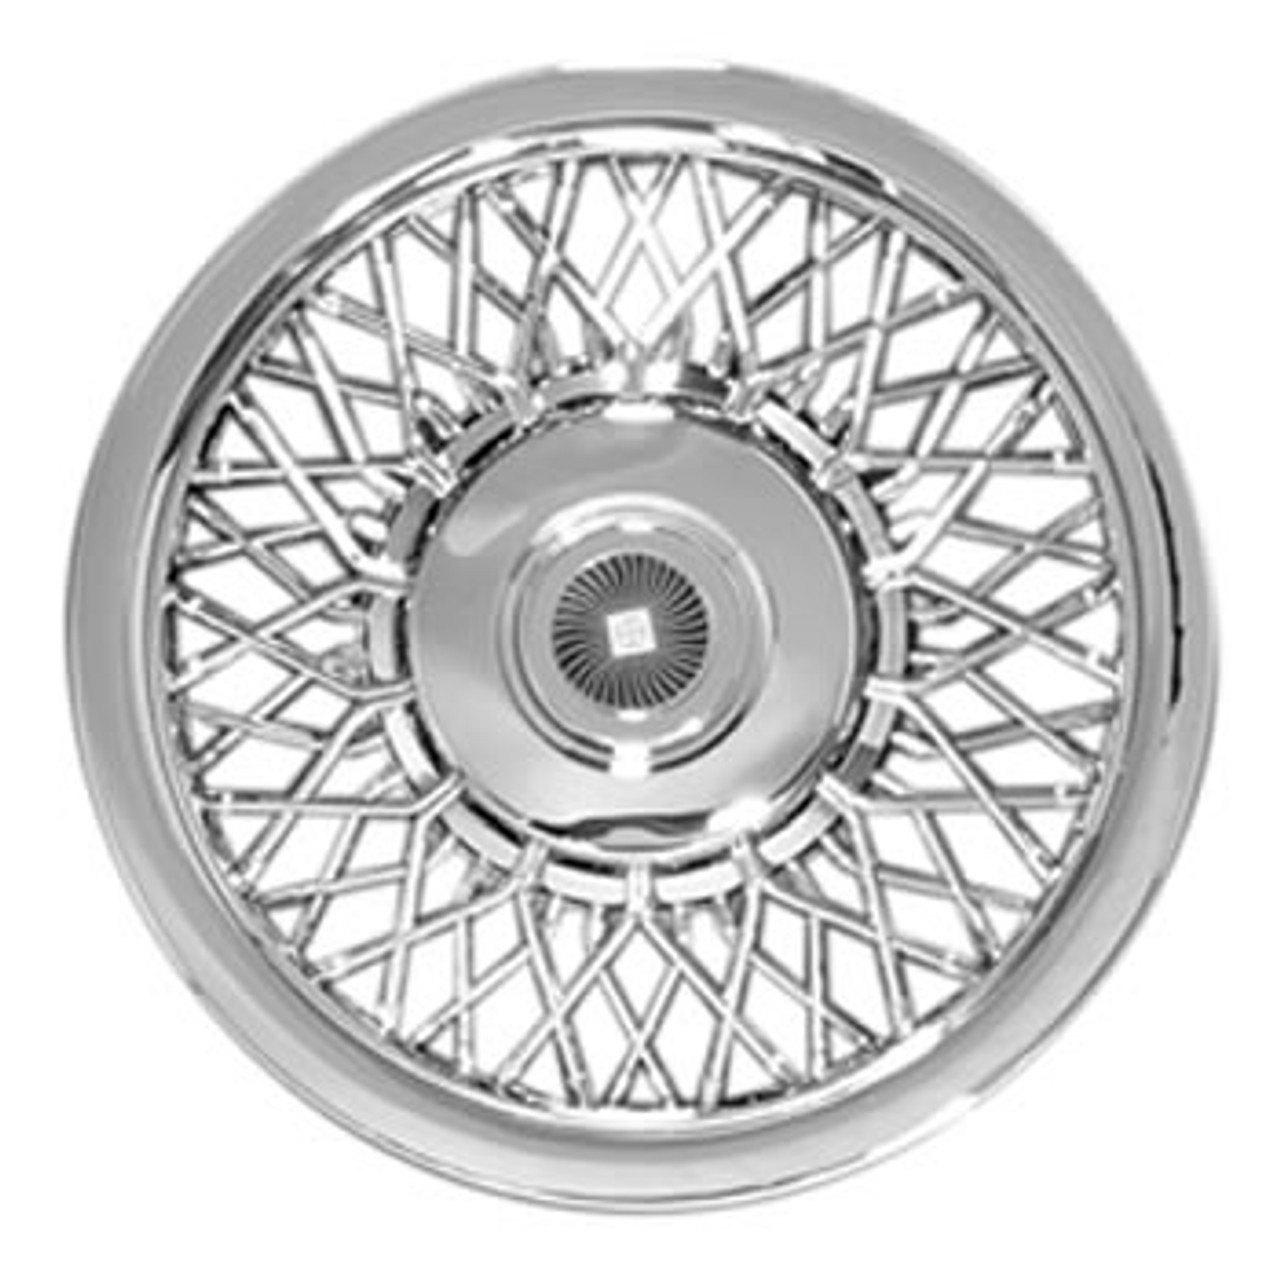 15 Inch Chrome Hubcaps - www.inf-inet.com